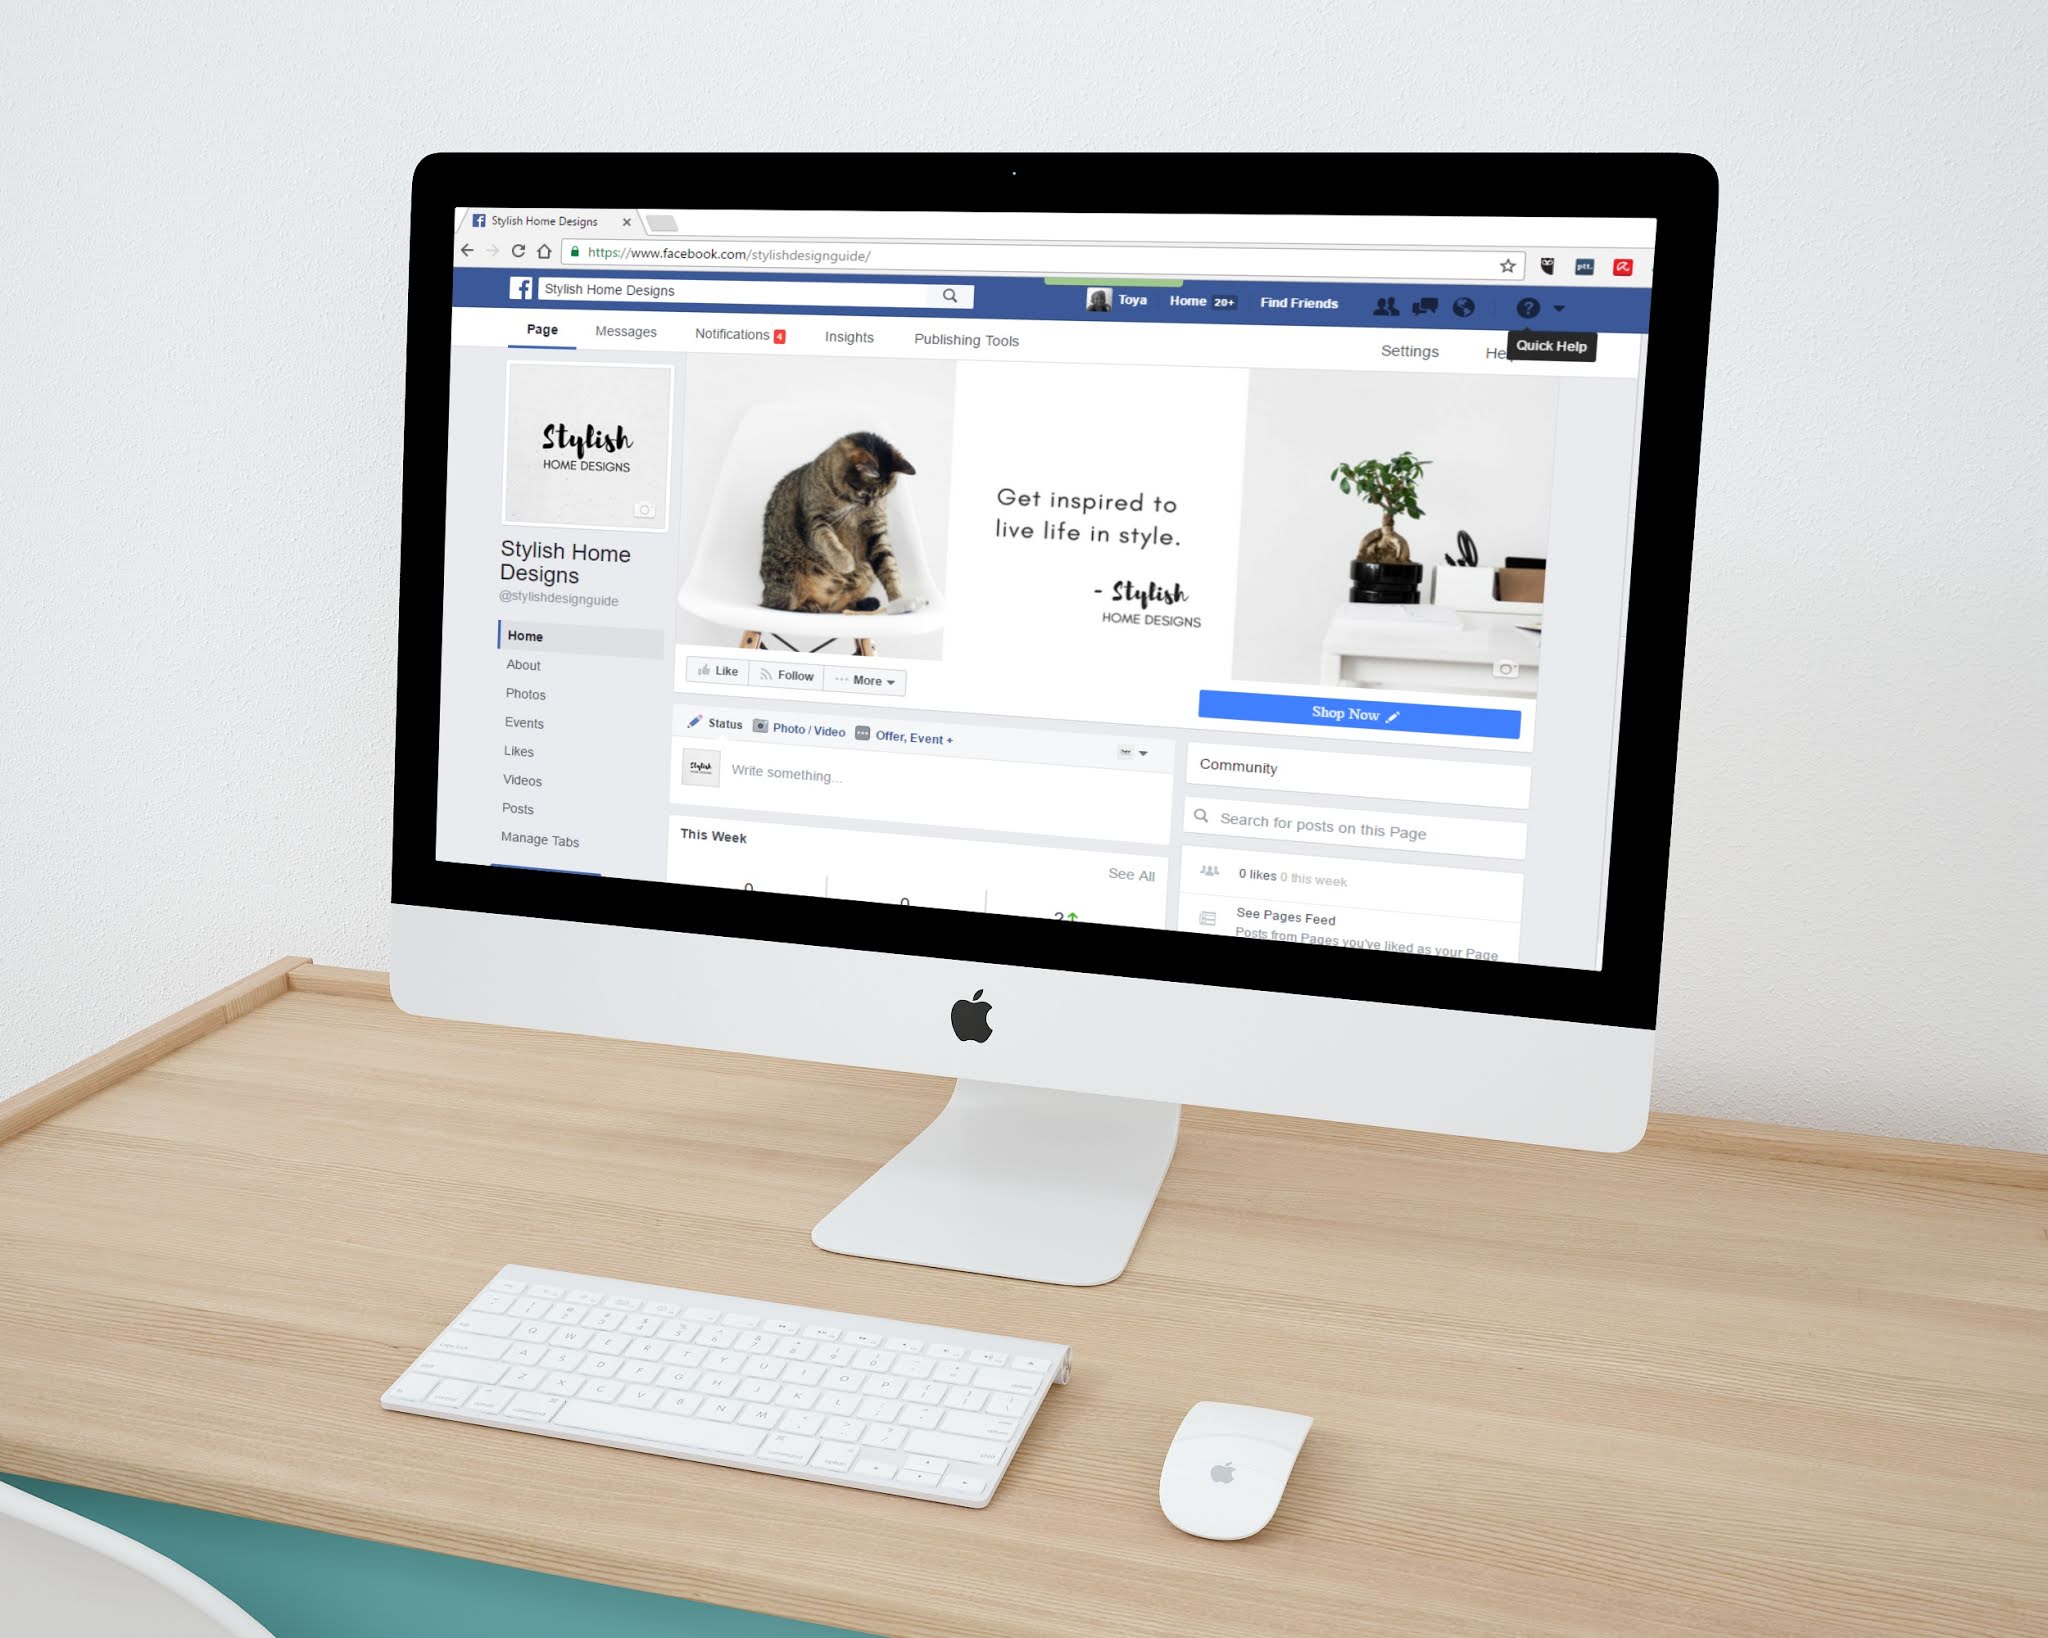 6 Best Practices to Create an Engaging Facebook Cover Photo